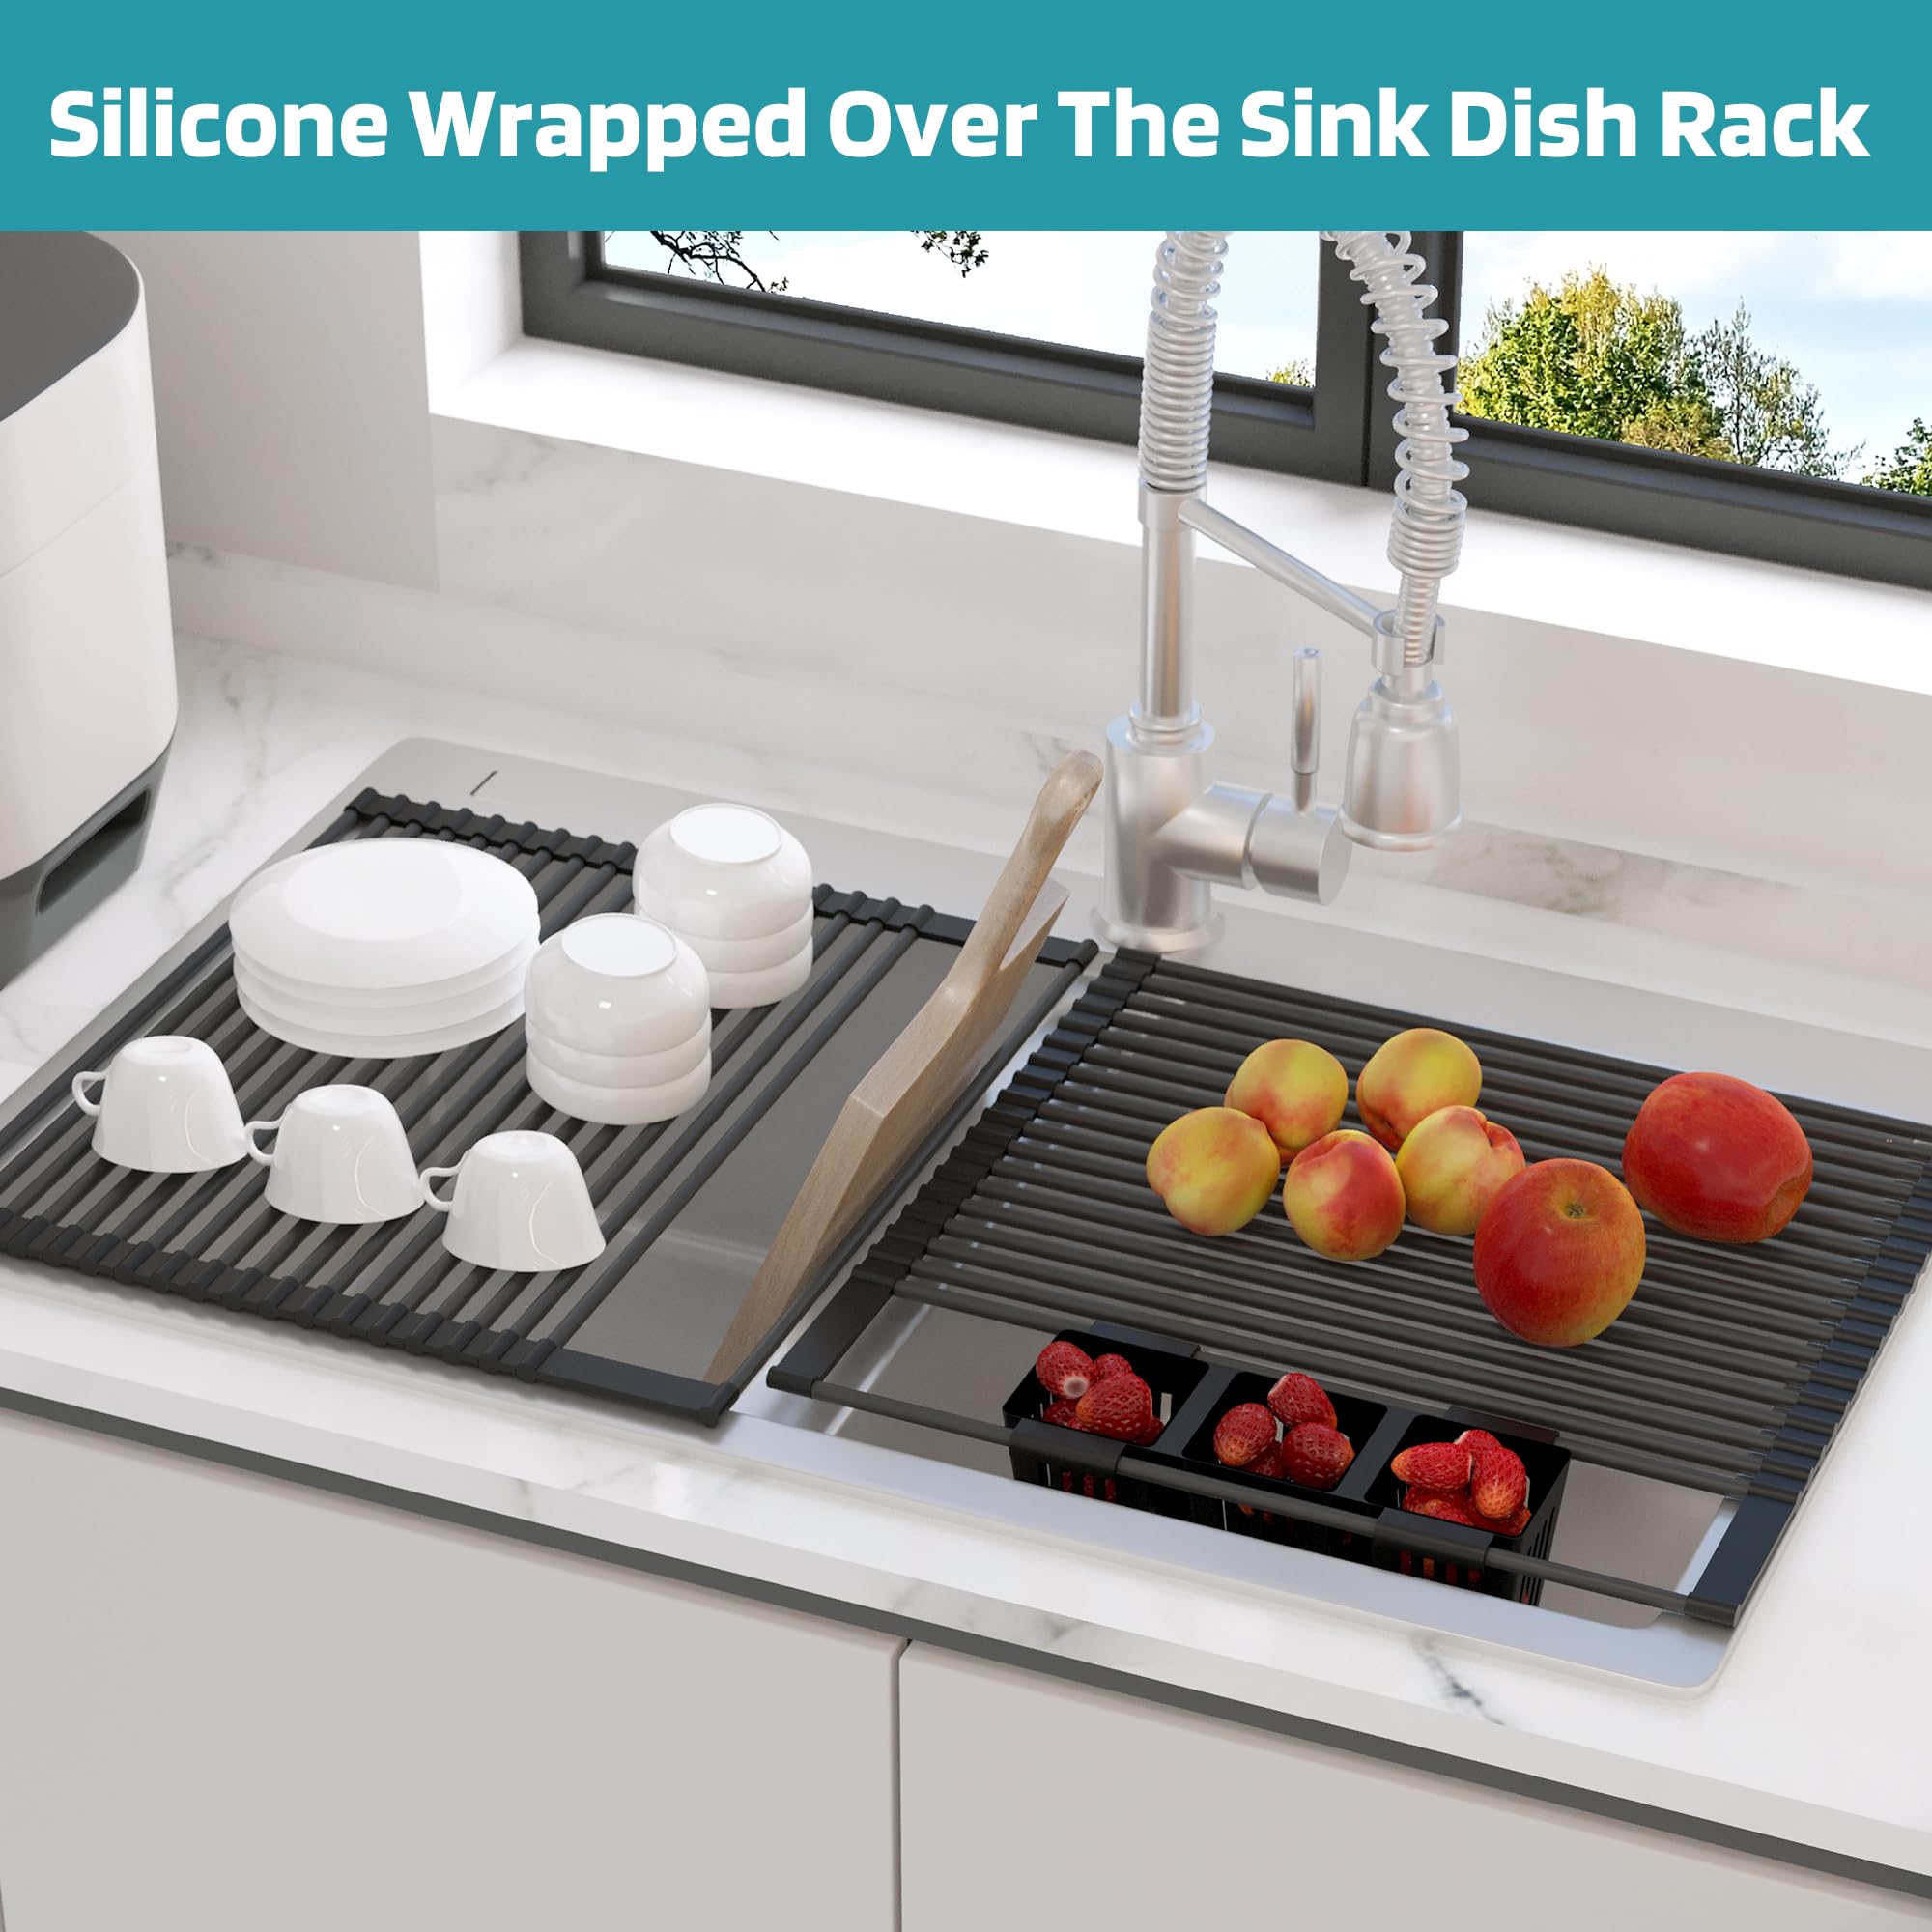 Roll Up Dish Drying Rack, Silicone Wrapped Over The Sink Multipurpose Foldable Dish Drainer Anti-Slip Dish Racks for Kitchen Counter, Sink Drying Rack Cover with Utensil Holder (Black, 17.3" x 17.6")